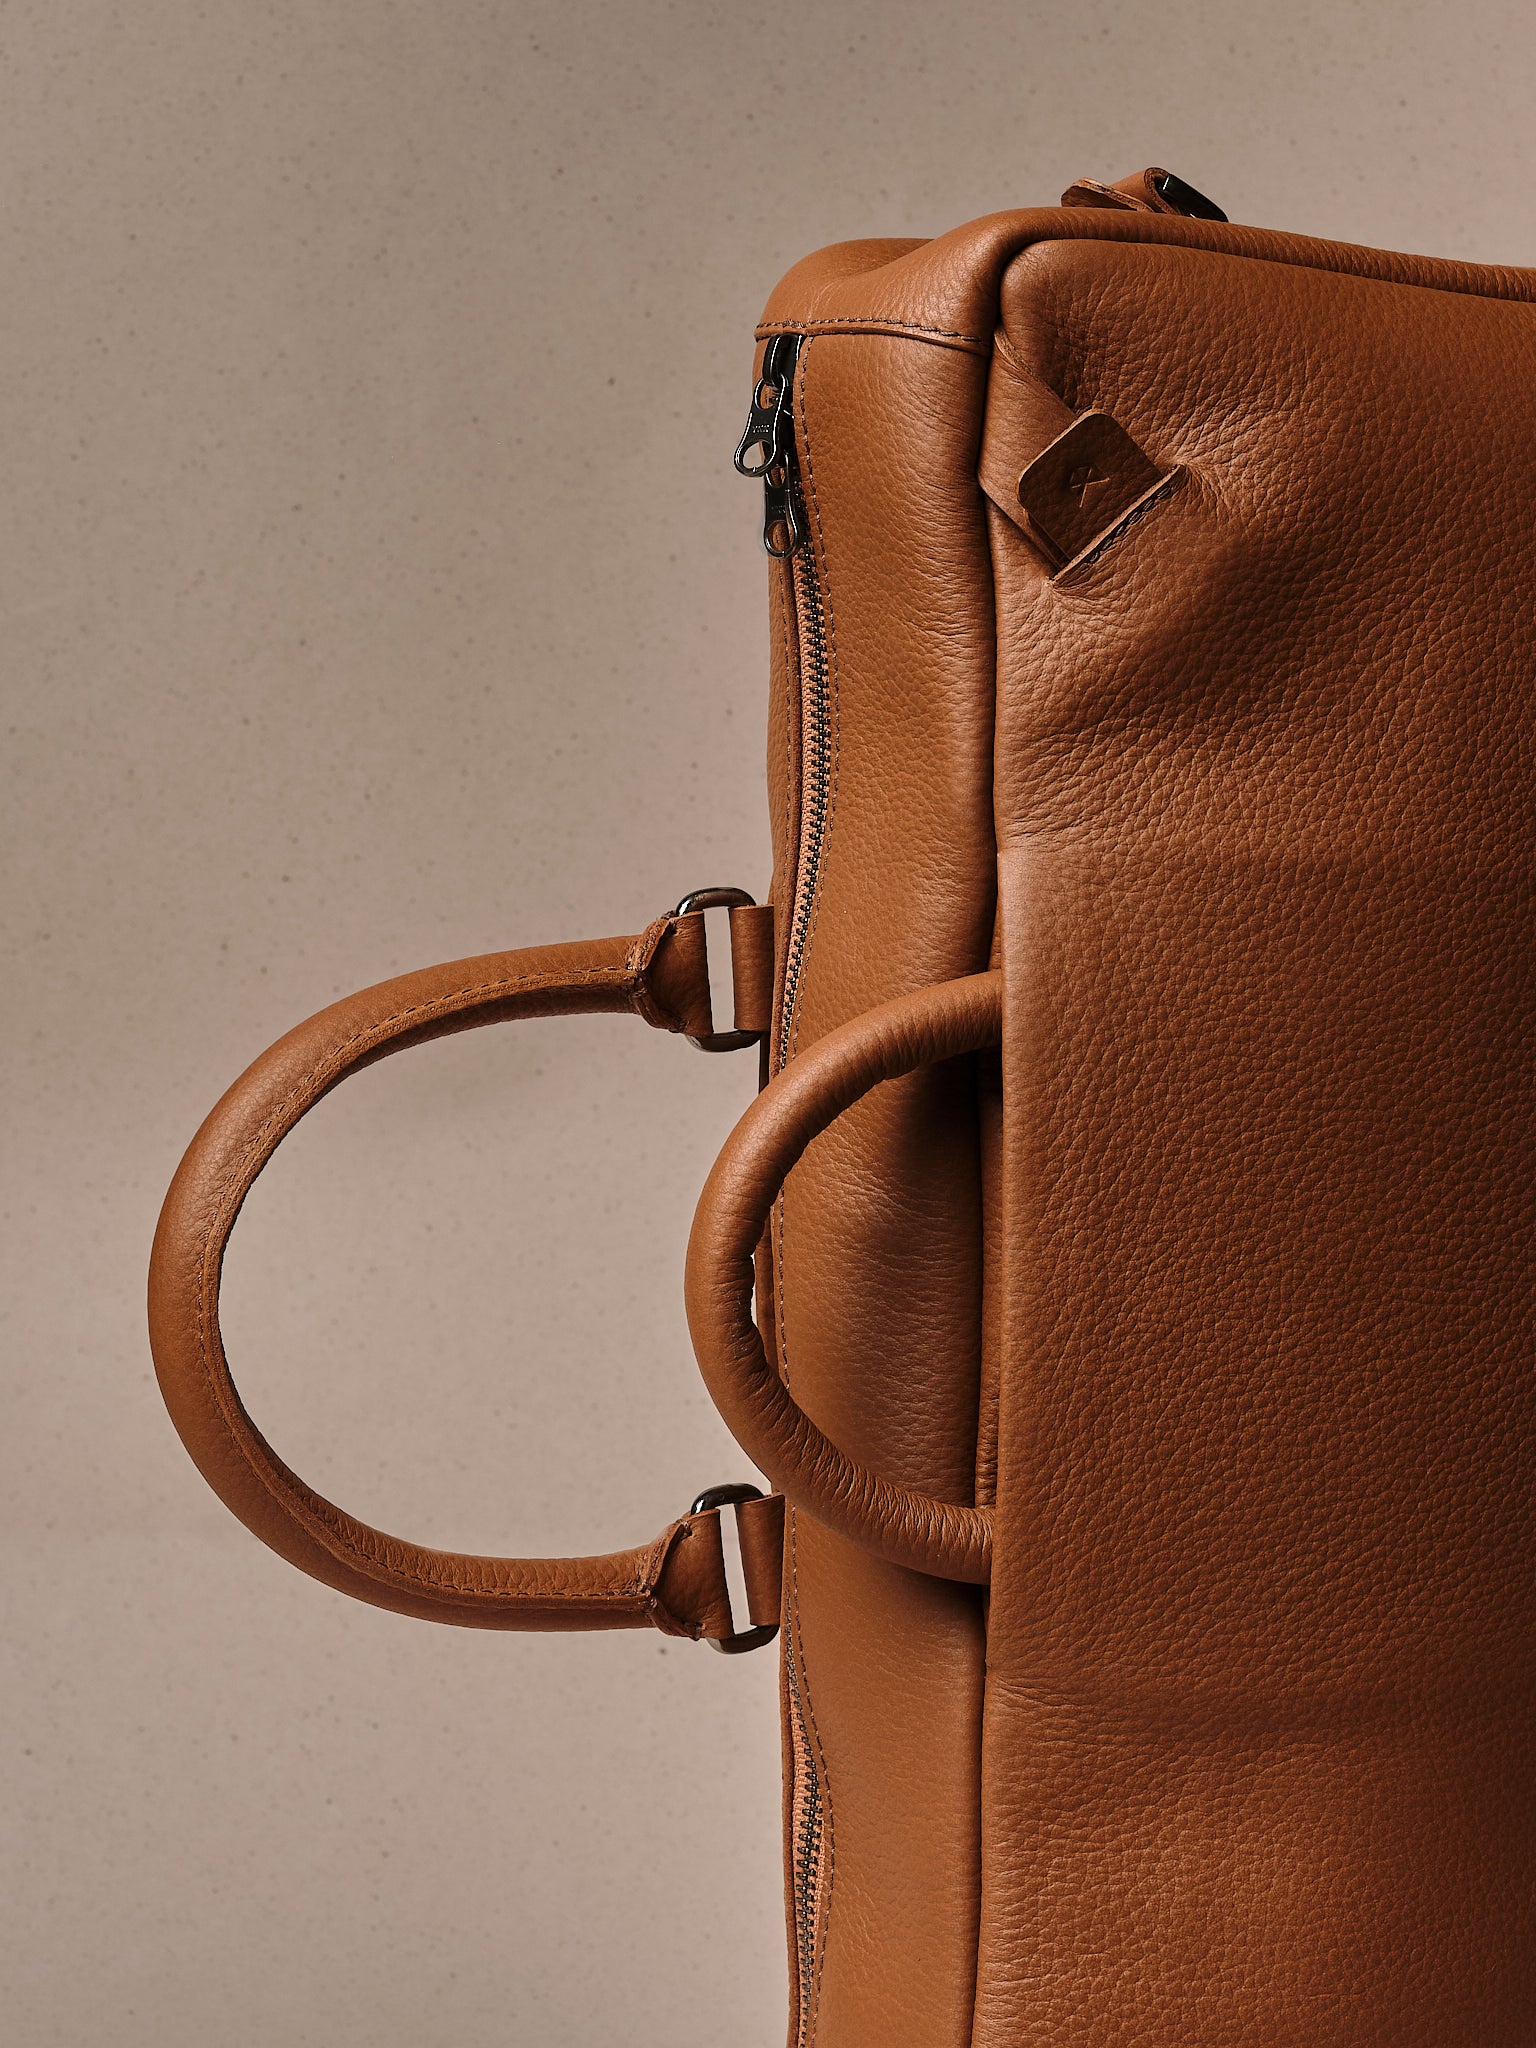 Retractable handles for briecase mode. Backpacks to Briefcases Tan by Capra Leather